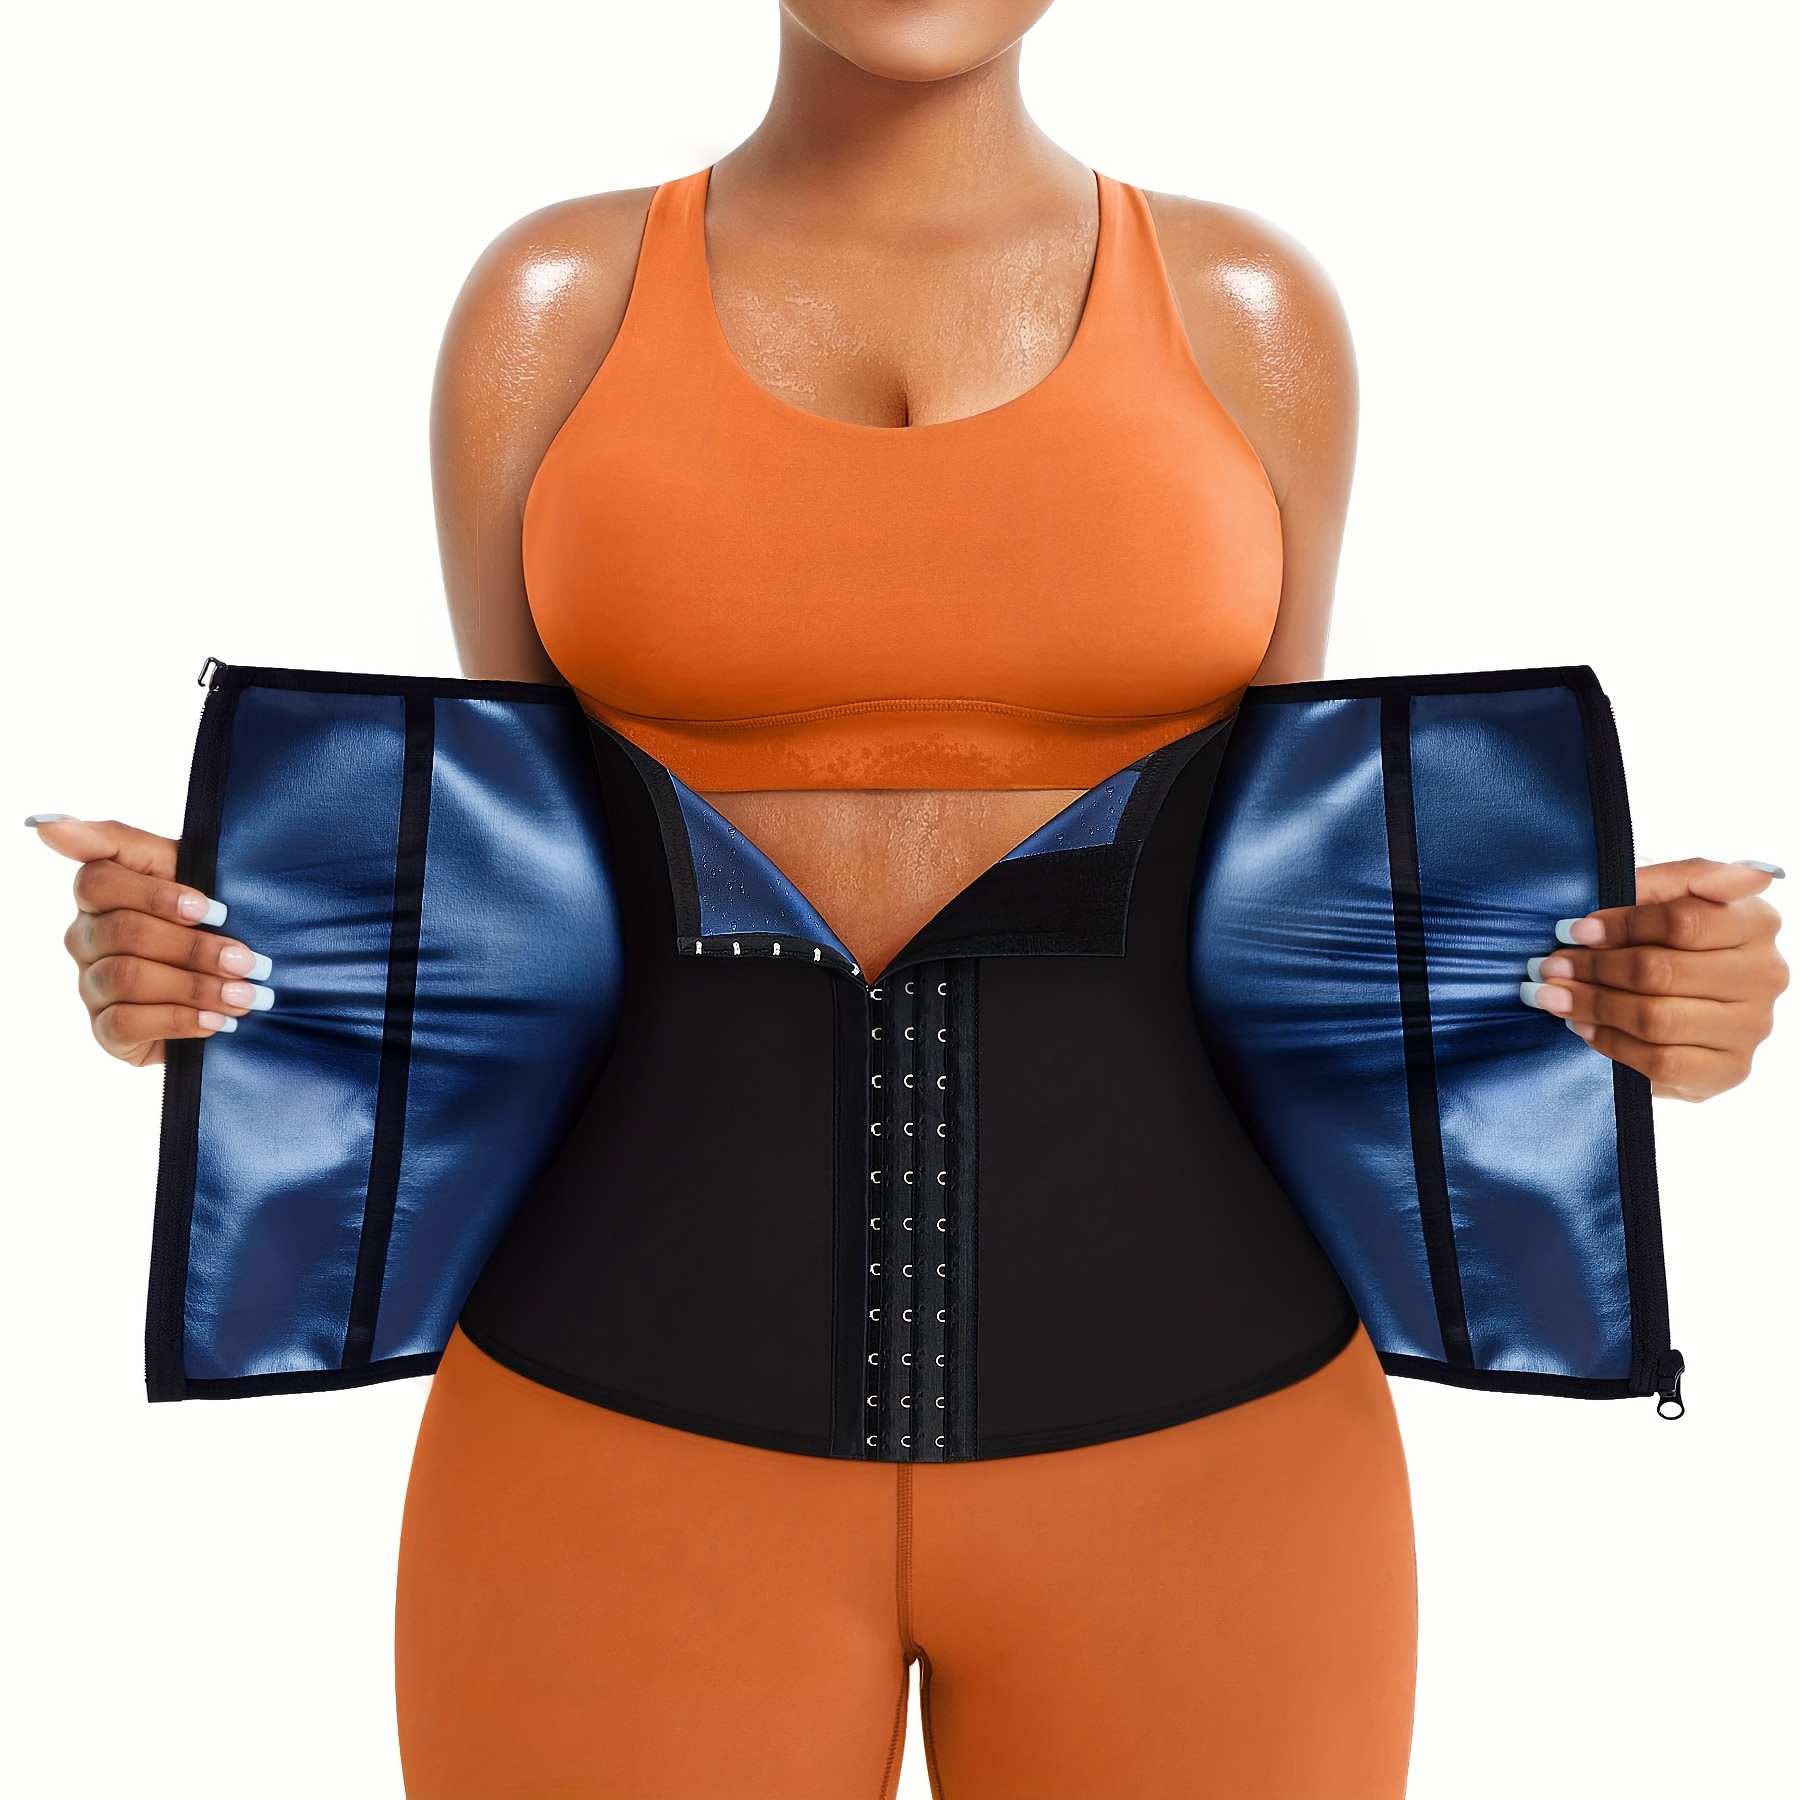 Always have my Pro waist trainer on me. 🖤 💛 @slimtum Cute, sporty, keeps  me snatched and ready to workout. ⚡️ ——— �